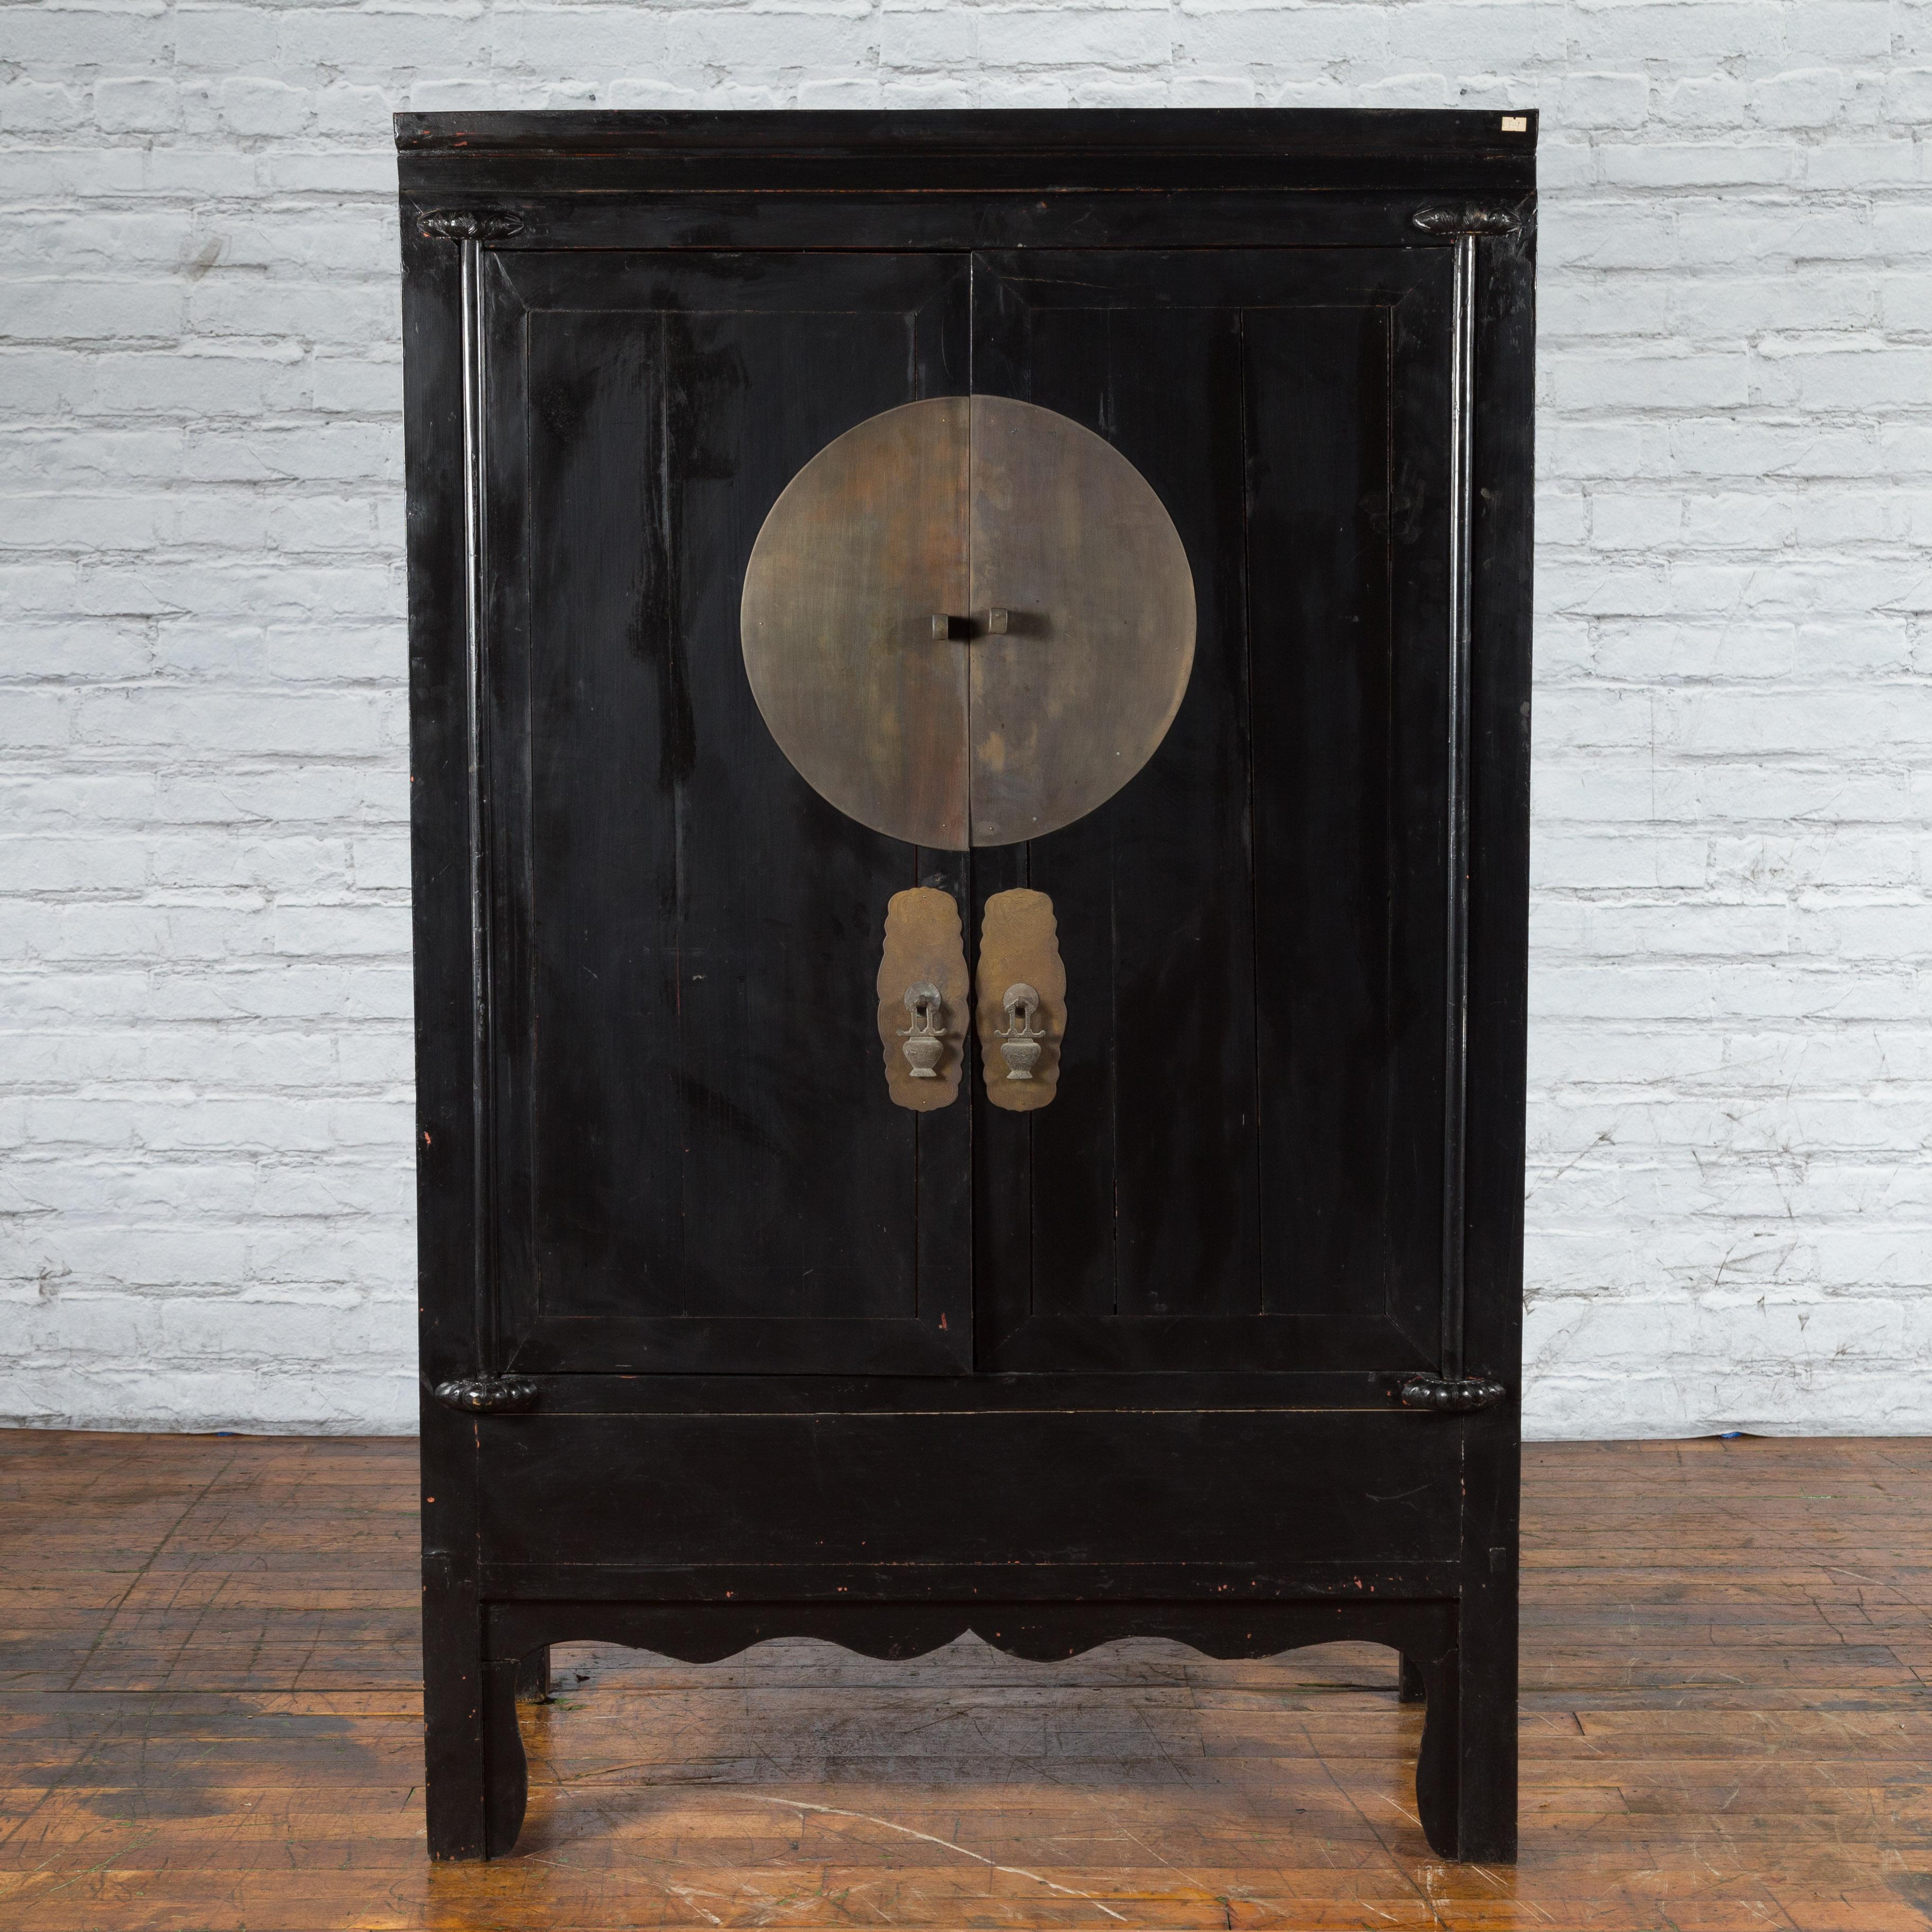 An antique Chinese wedding cabinet from the early 20th century with black lacquer and large brass medallion hardware. Created in China during the early years of the 20th century, this wedding cabinet features a black lacquered ground perfectly